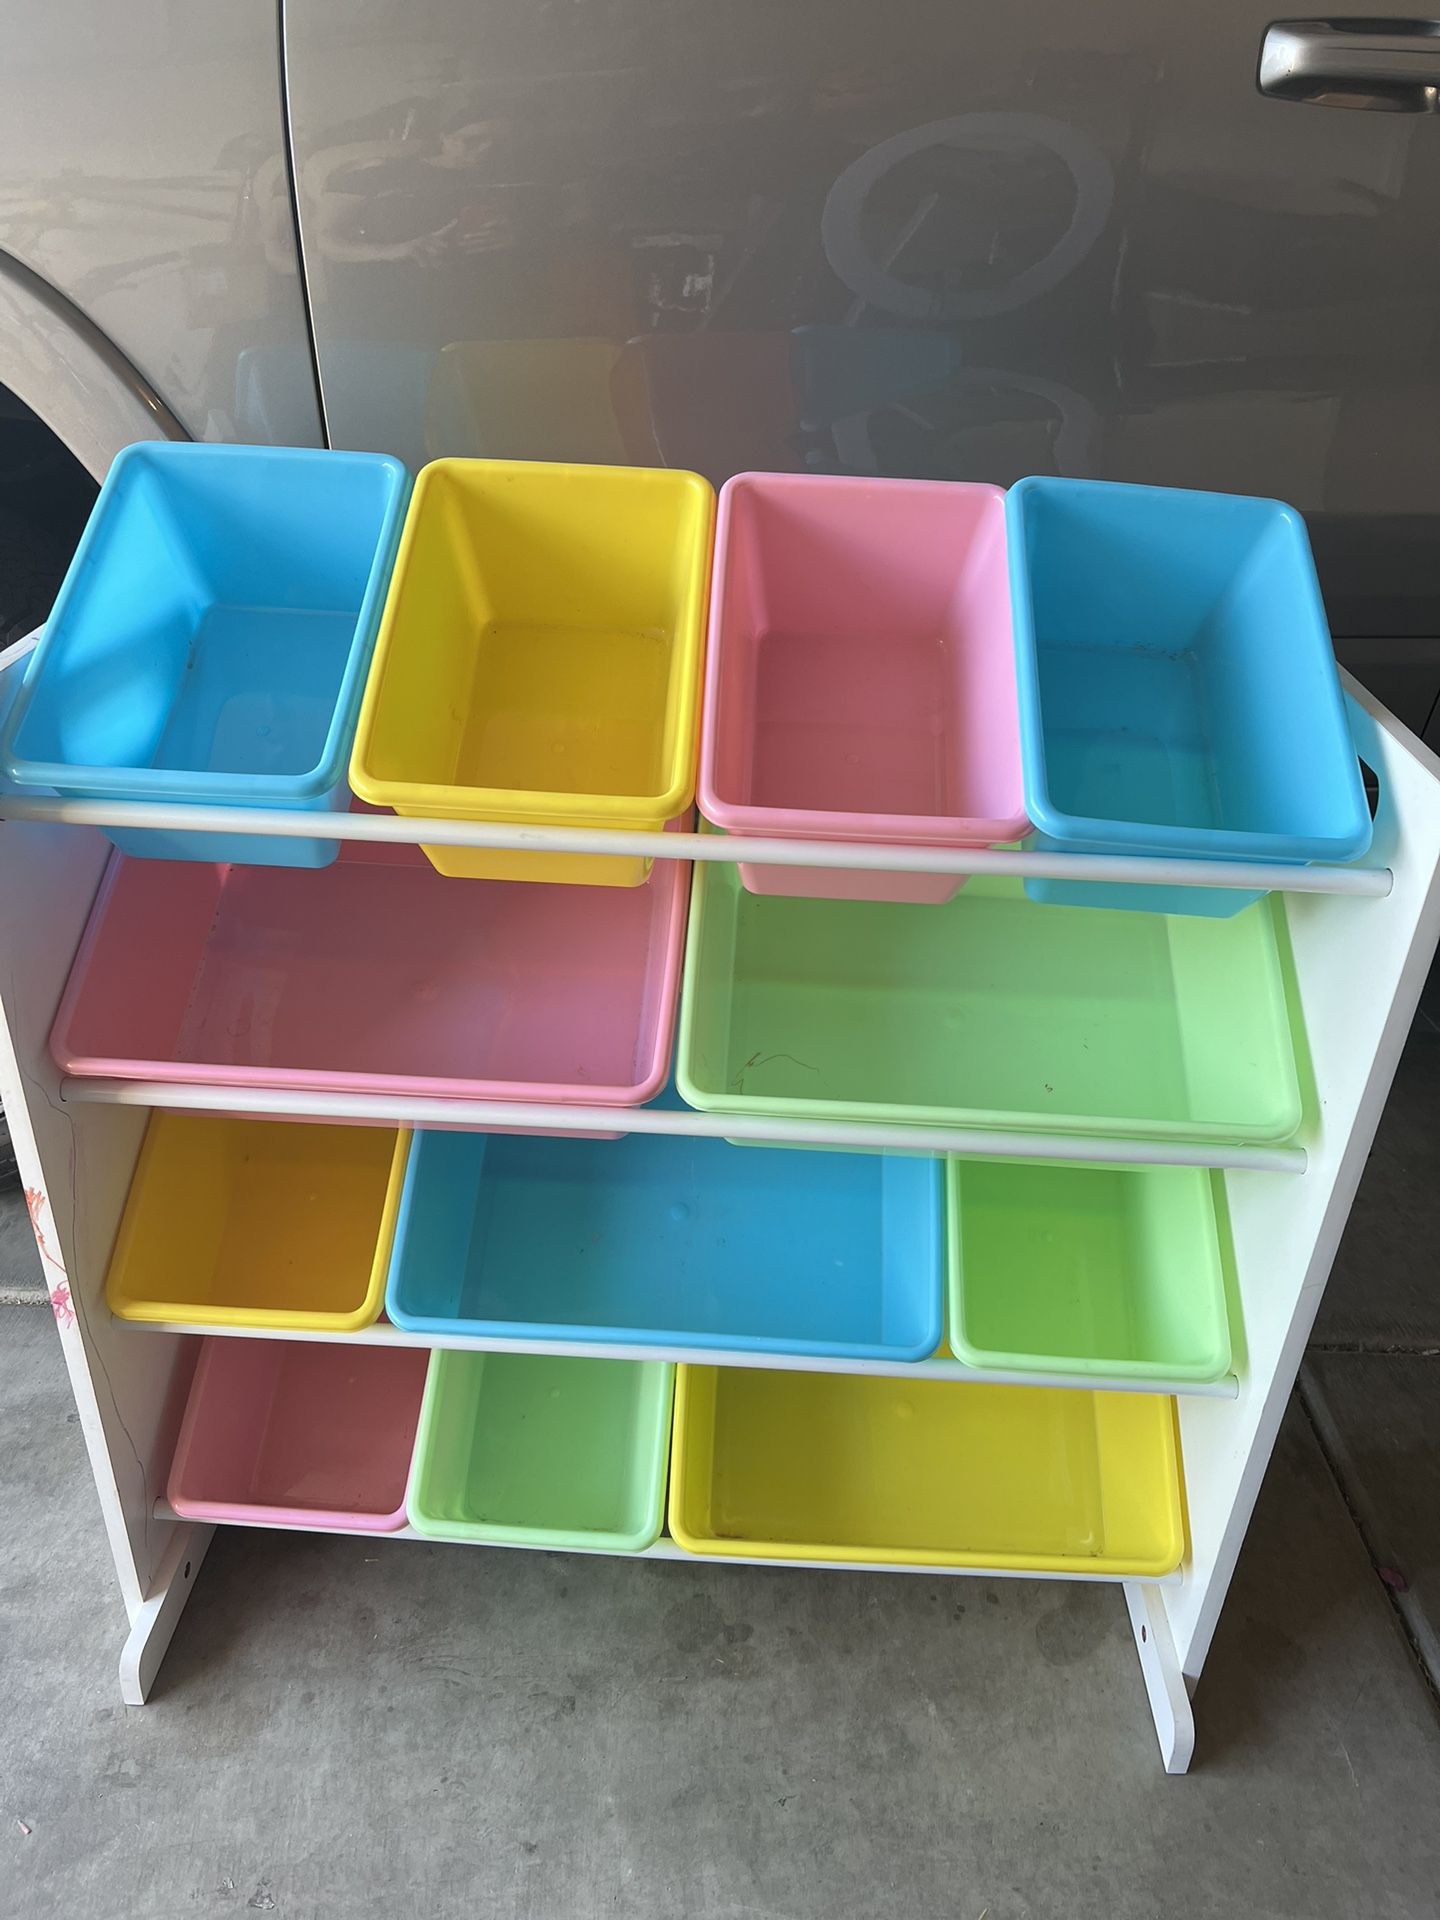 Colorful Toy Bin $20